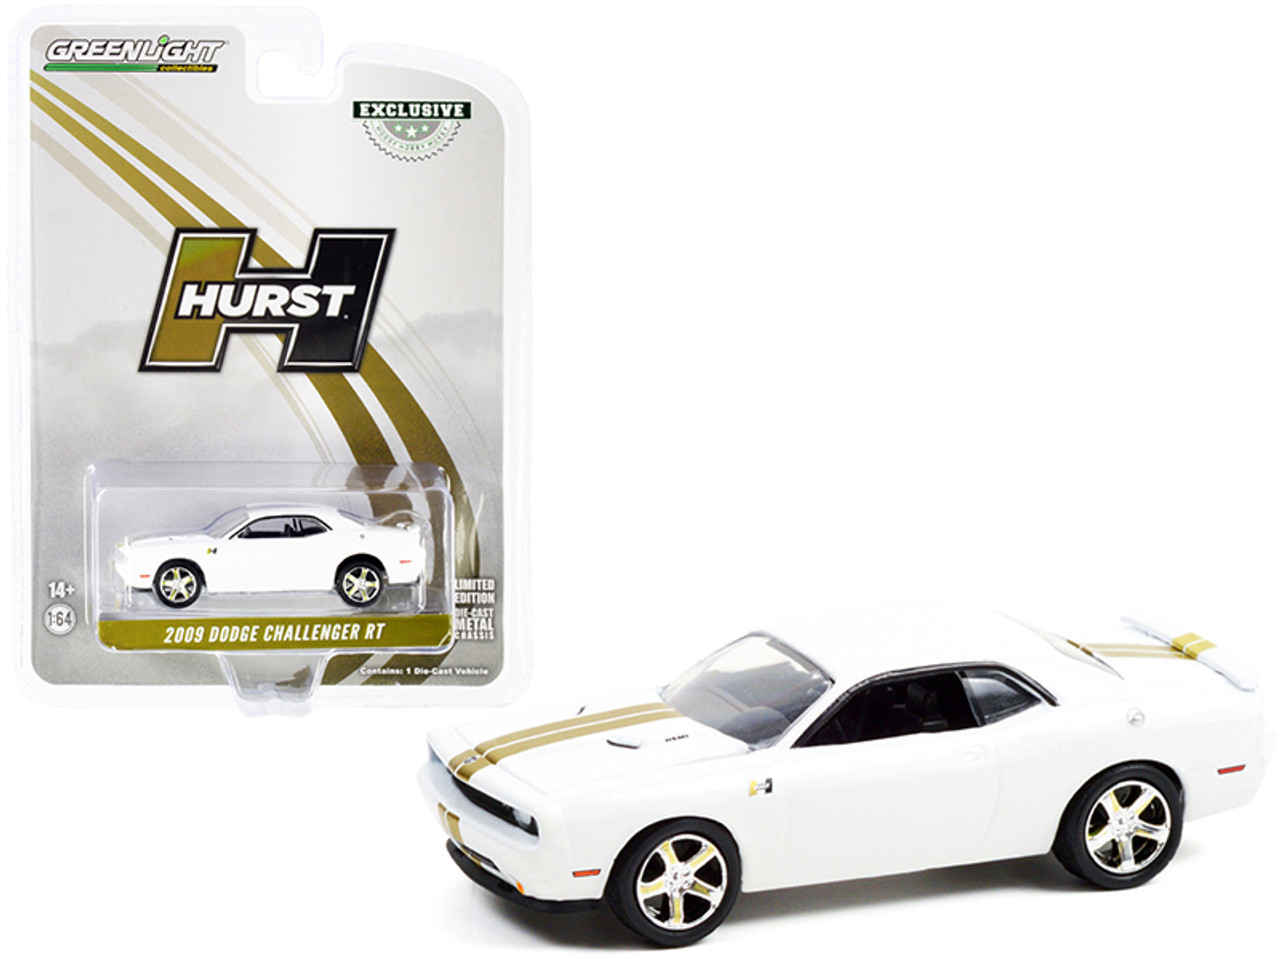 2009 Dodge Challenger R/T HEMI White with Gold Stripes "Hurst Performance Edition" "Hobby Exclusive" 1/64 Diecast Model Car by Greenlight